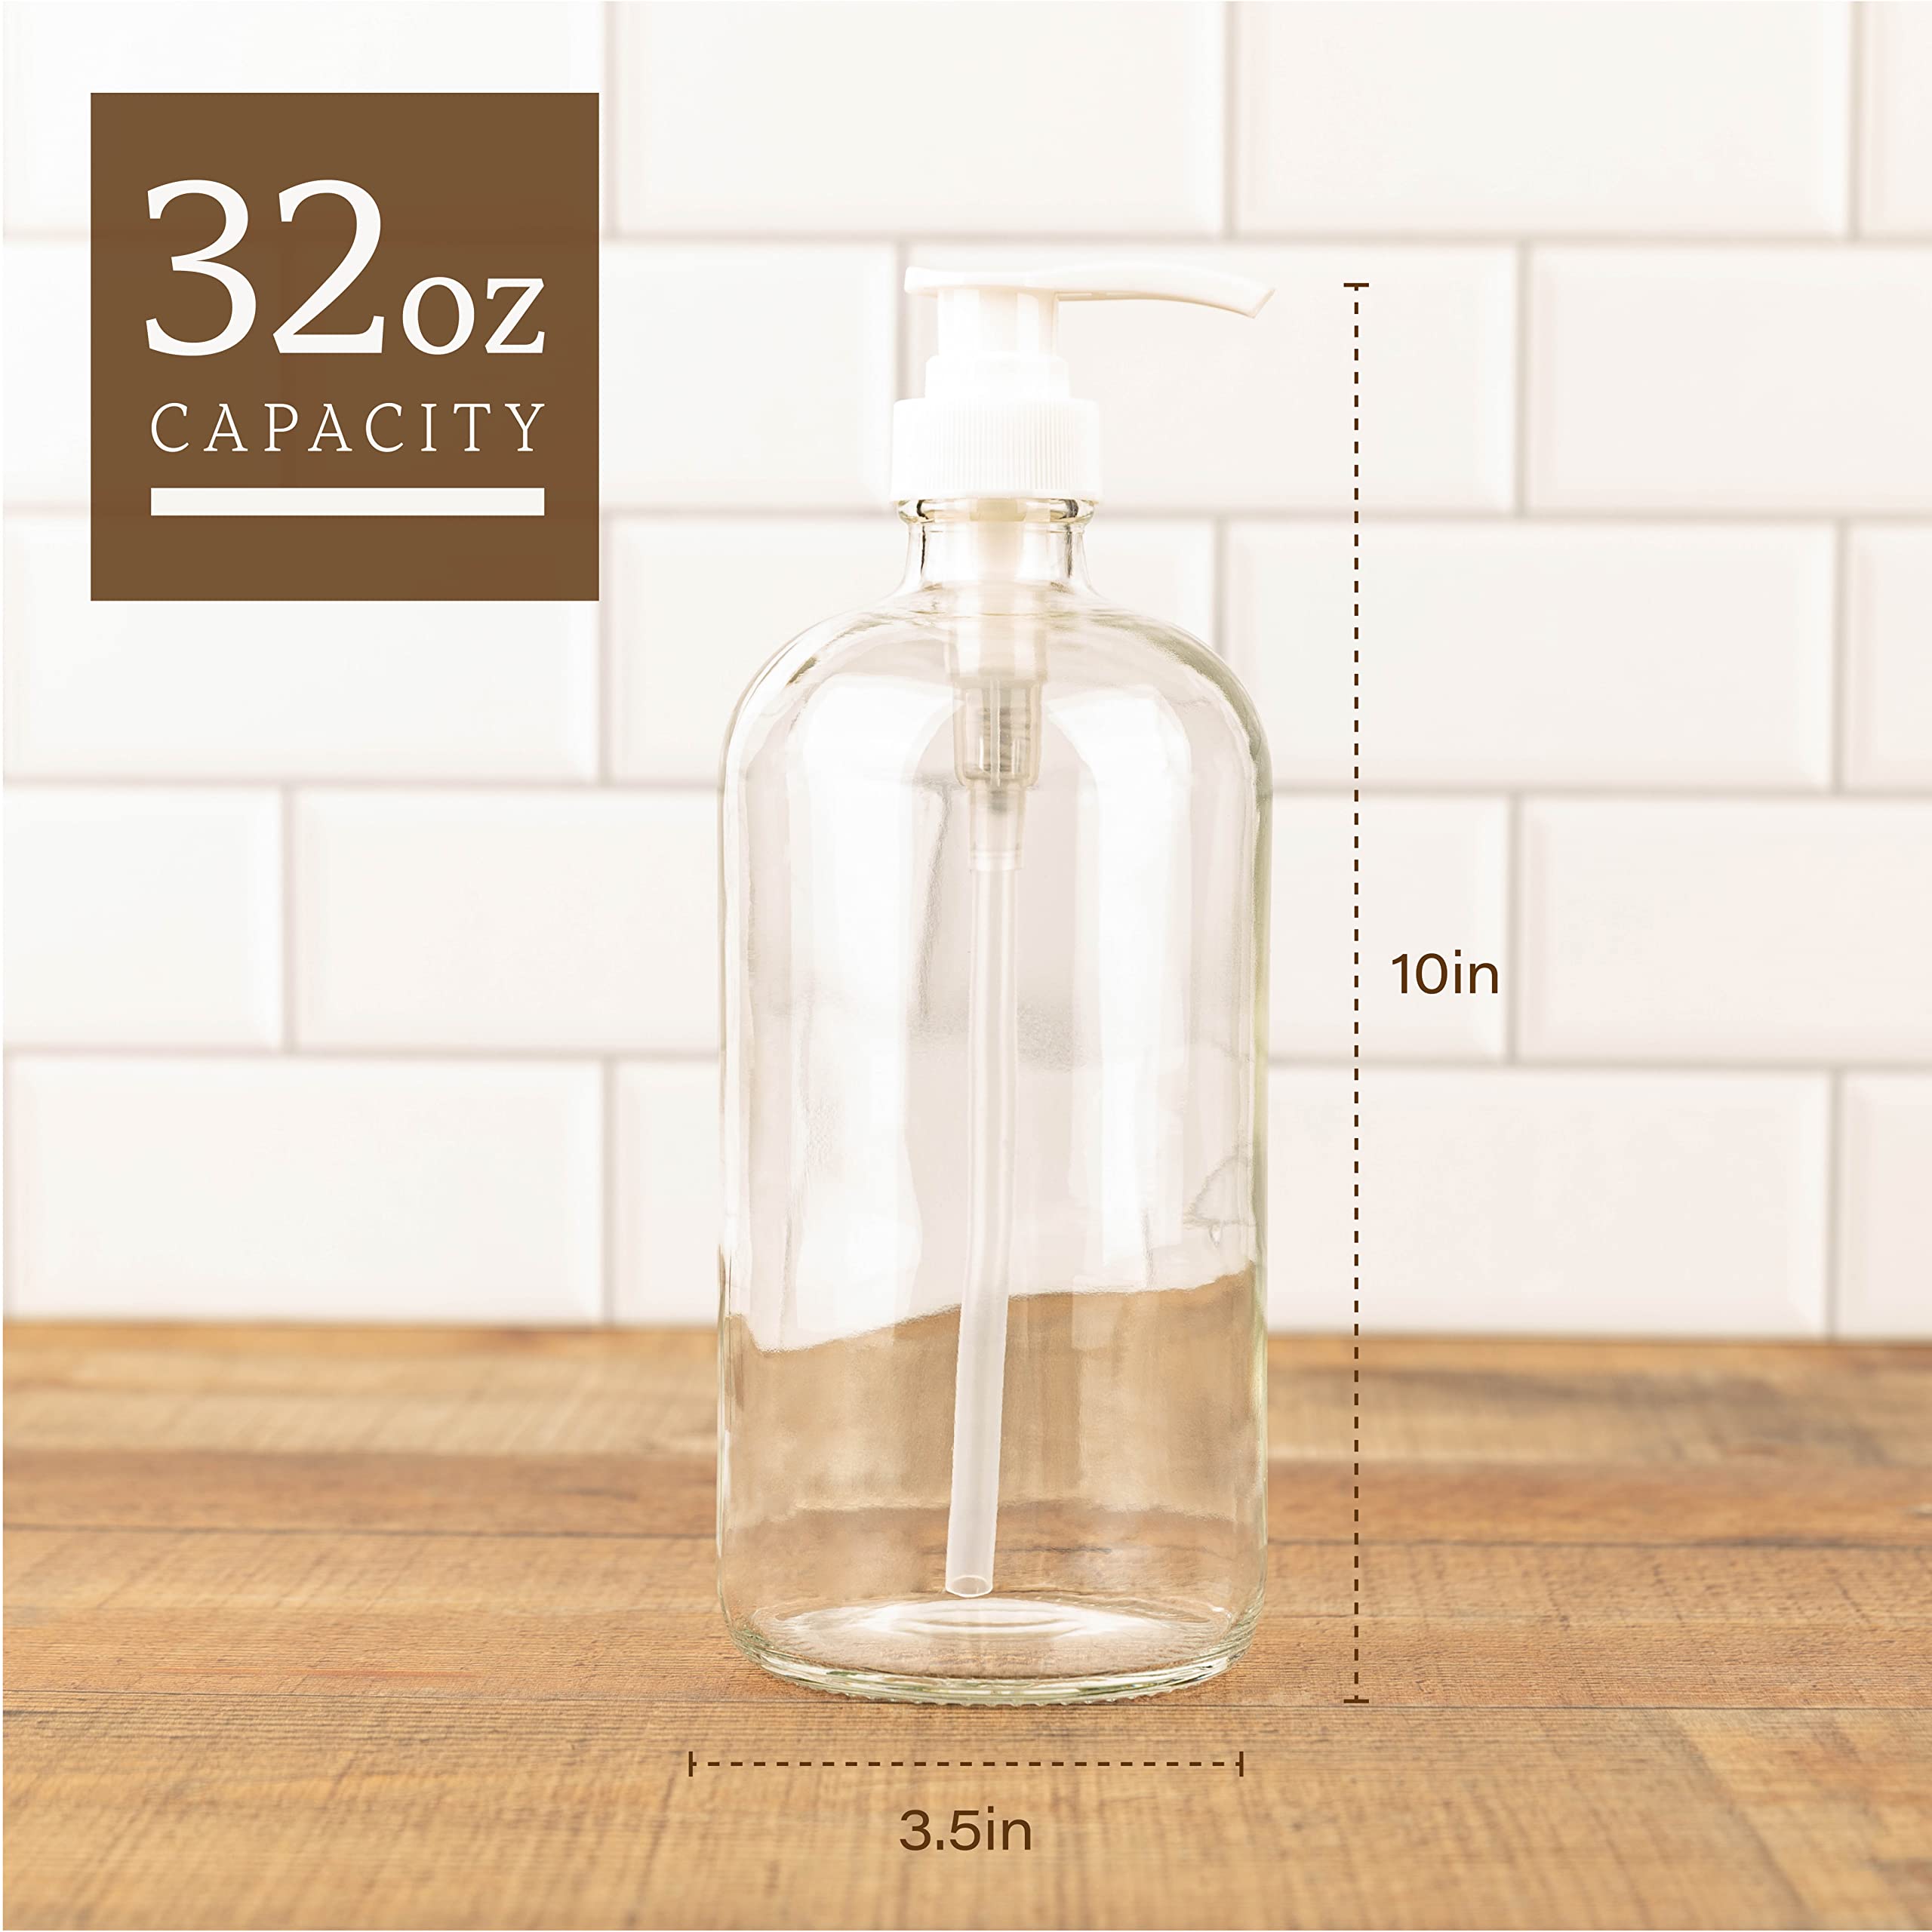 kitchentoolz 32-Ounce Large Clear Glass Boston Round Bottles w/Pumps. Great for Lotions, Soaps, Oils, Sauces - Food Safe and Medical Grade (Pack of 2)  - Like New